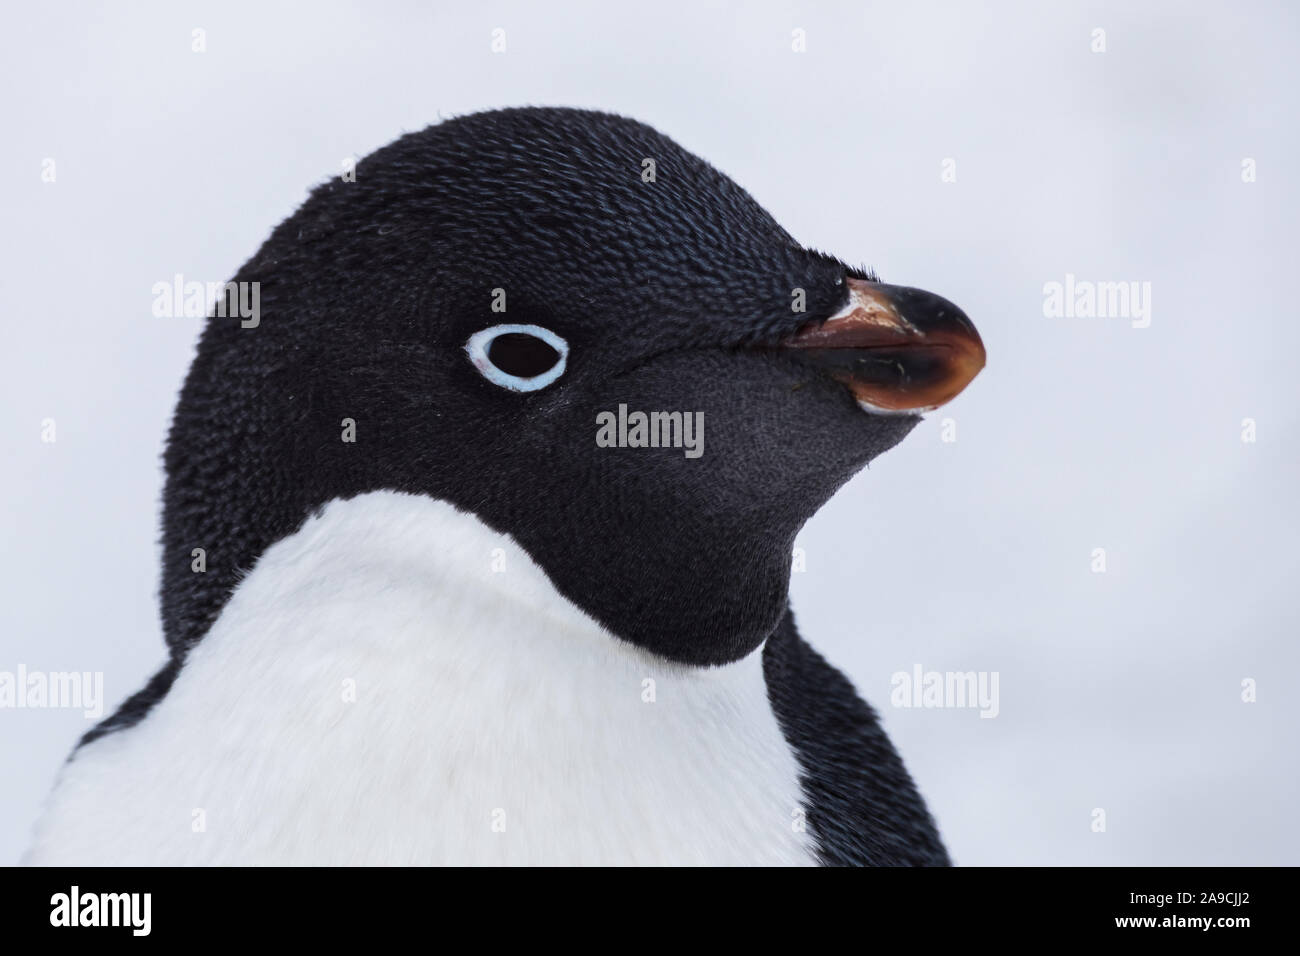 Close-up portrait of Adelie Penguin head staring at camera in Antarctica with ice and snow white background, Antarctic wildlife and seabirds Stock Photo